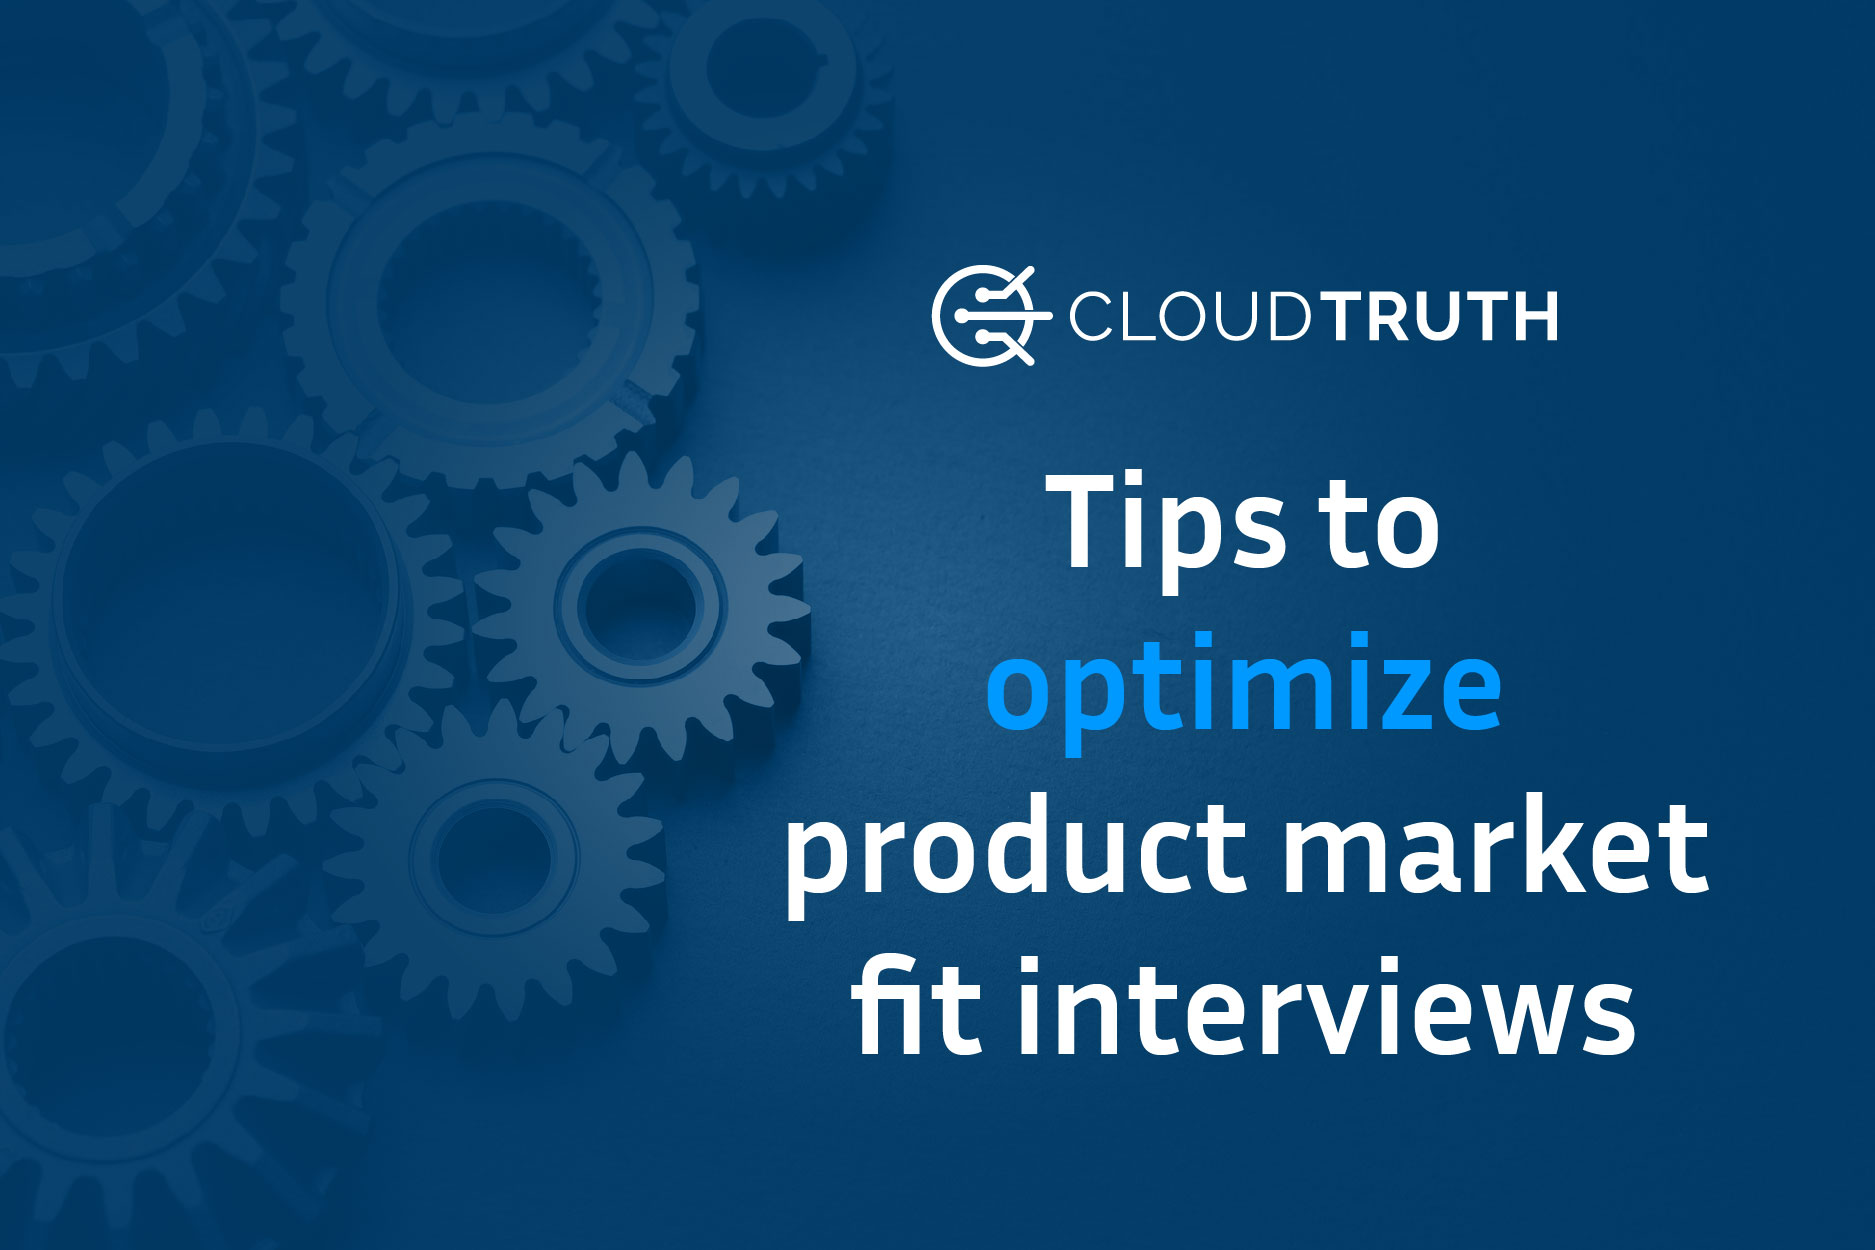 Tips and Tricks for Optimizing Your Product-Market Fit Interviews